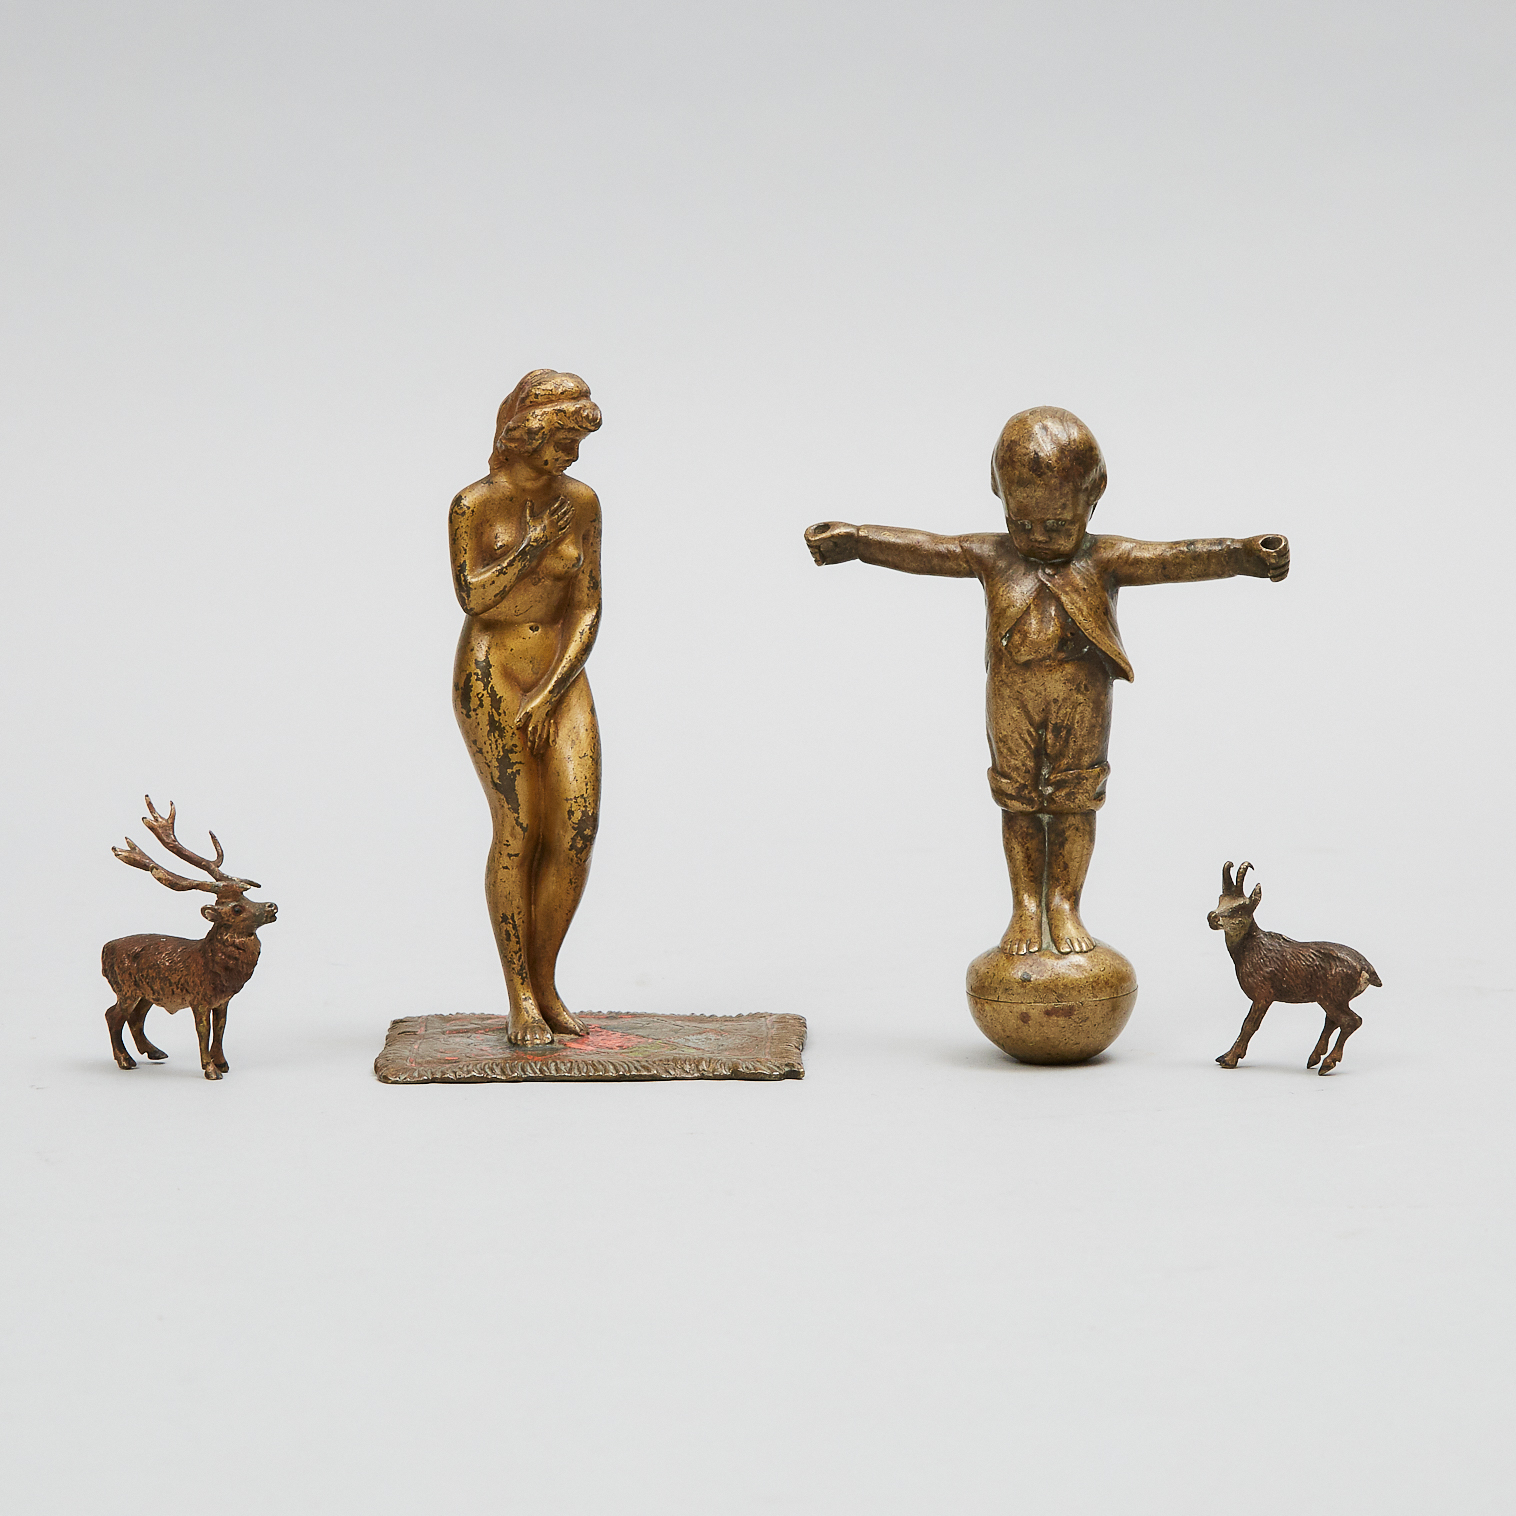 Four Small Austrian Bronzes, 19th/early 20th centuries